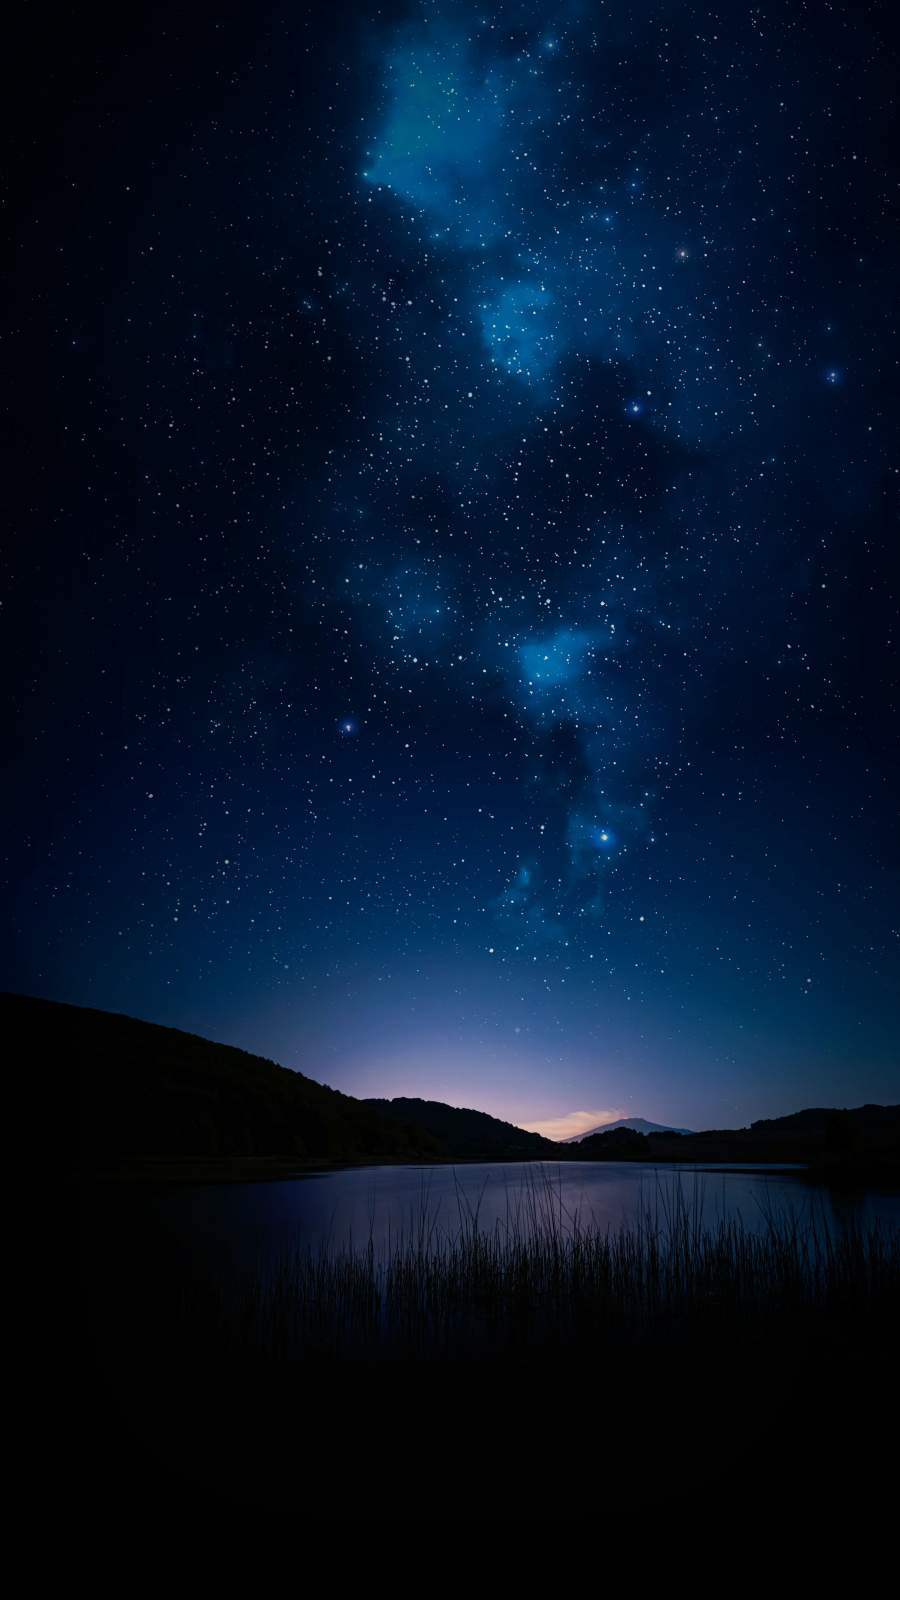 Night Sky Nature Lake - IPhone Wallpapers : iPhone Wallpapers